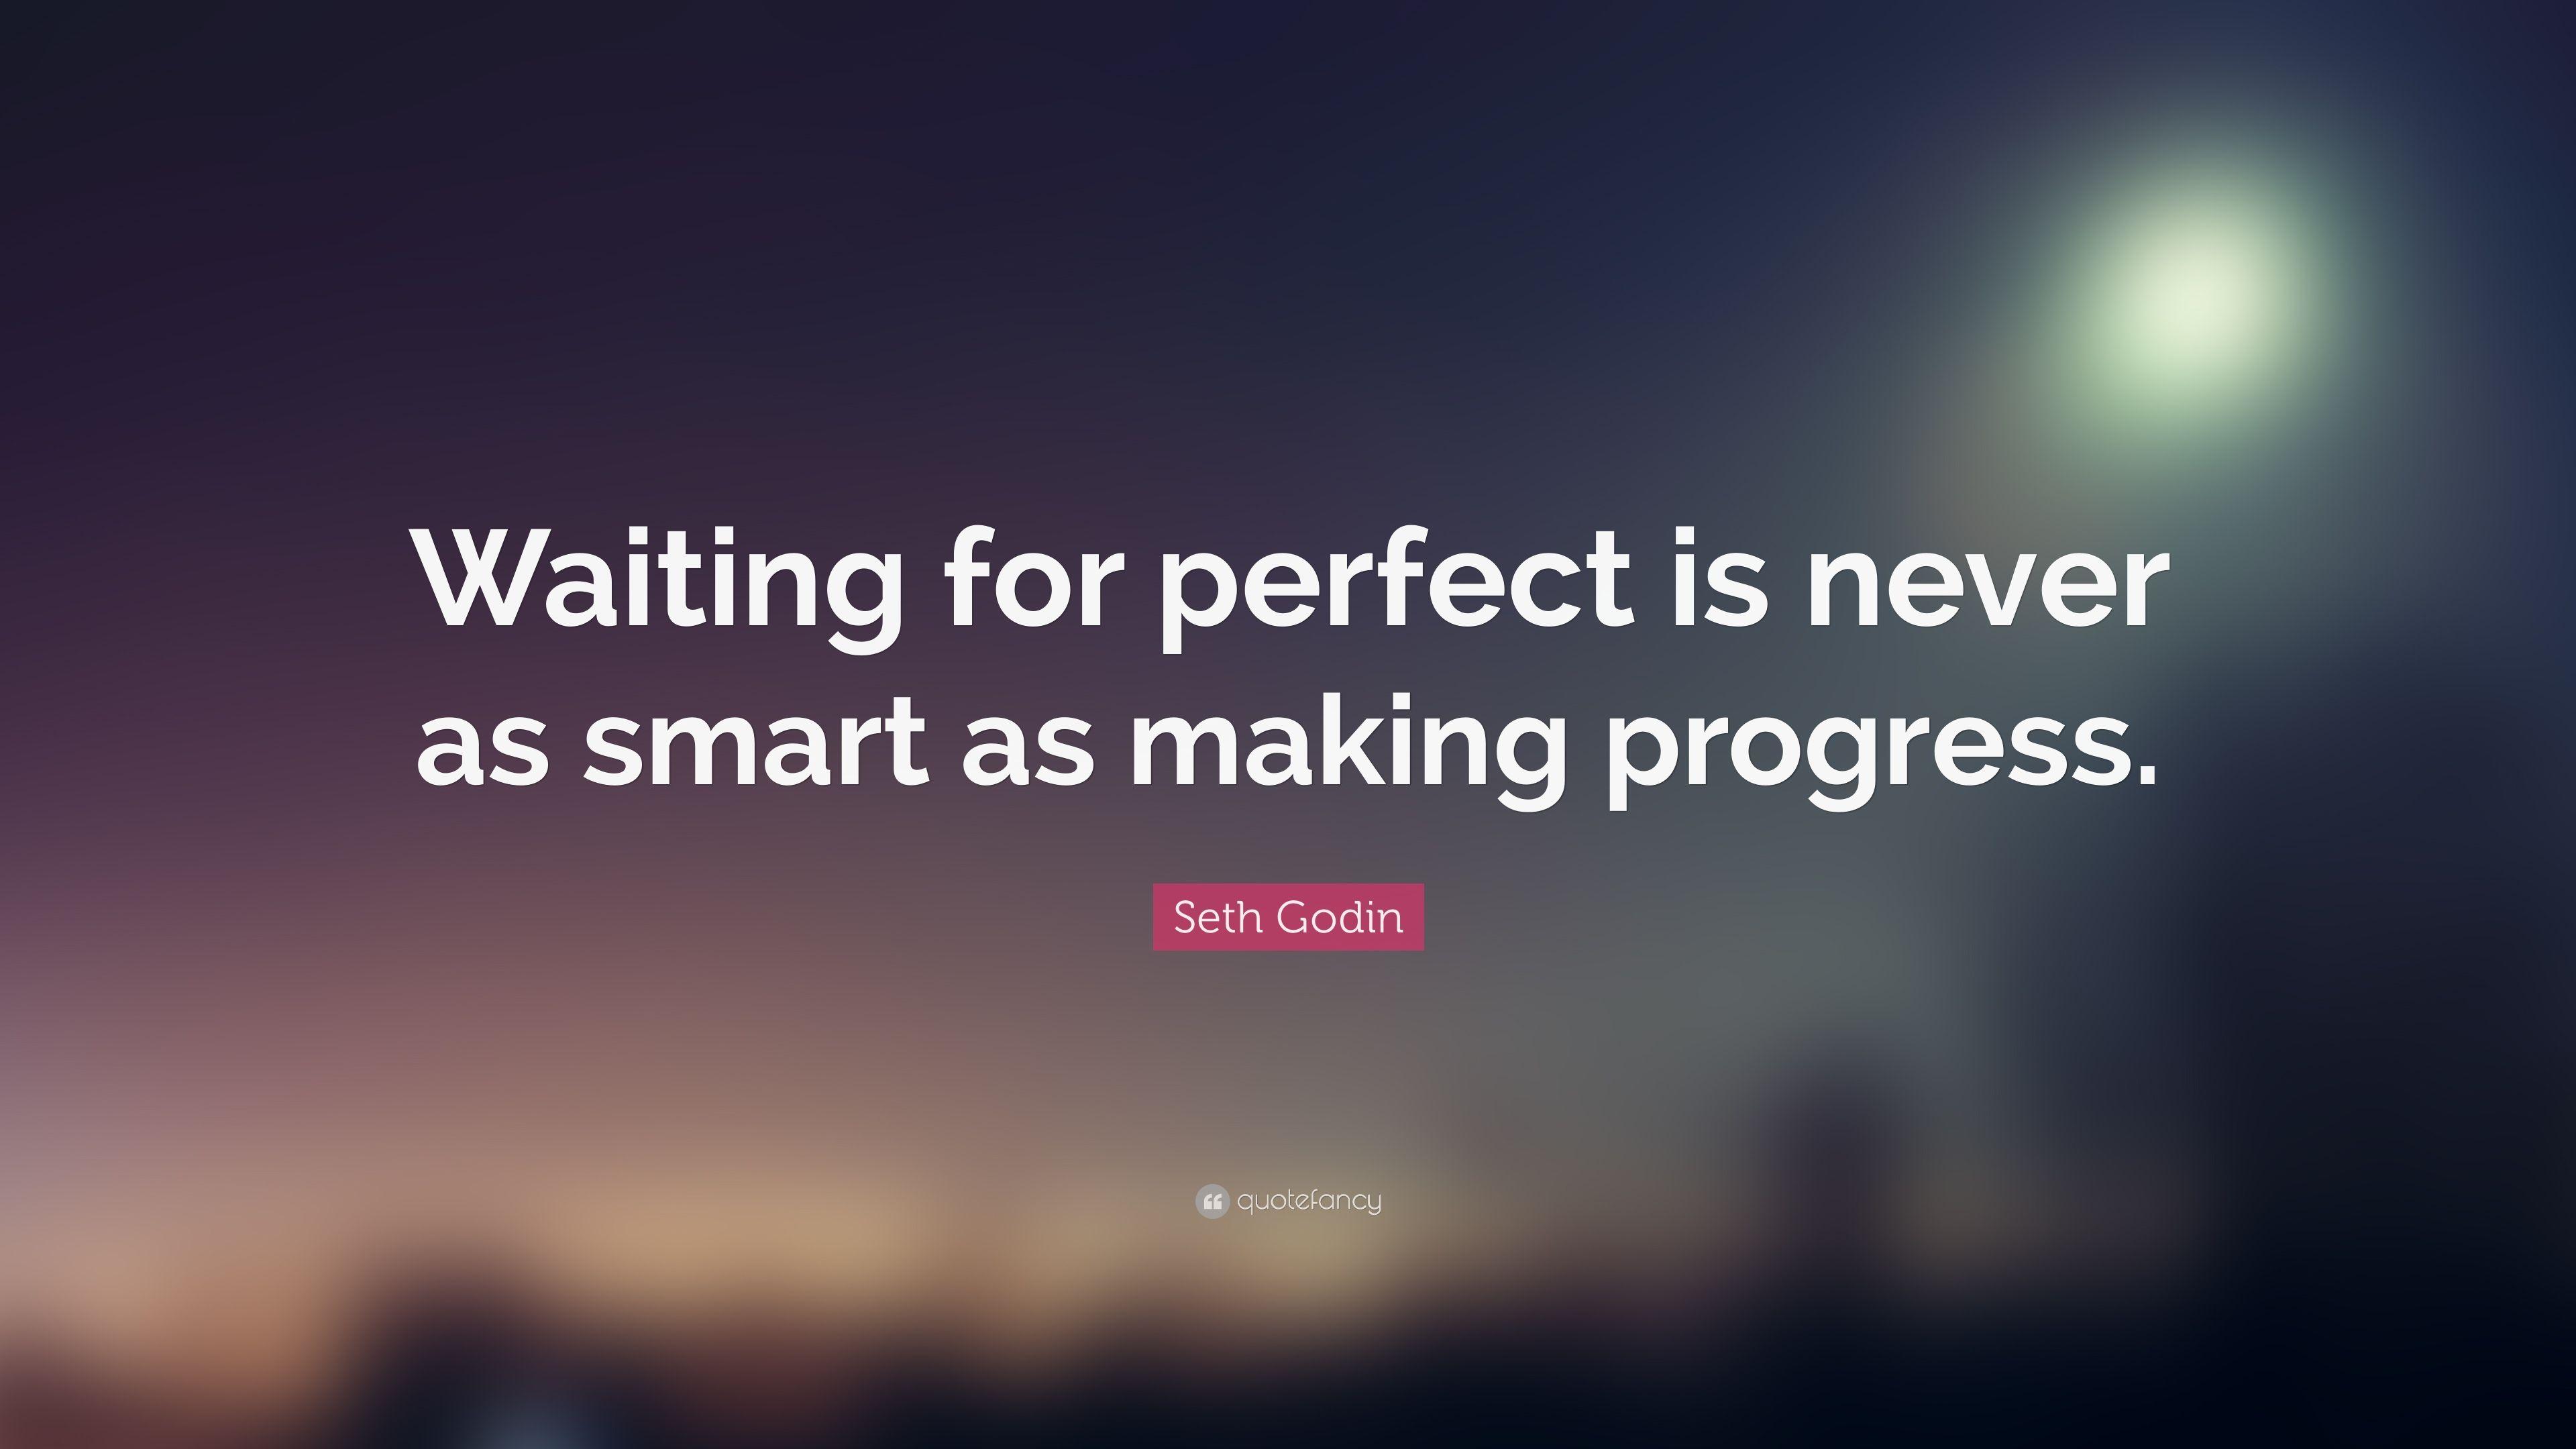 Seth Godin Quote: “Waiting for perfect is never as smart as making